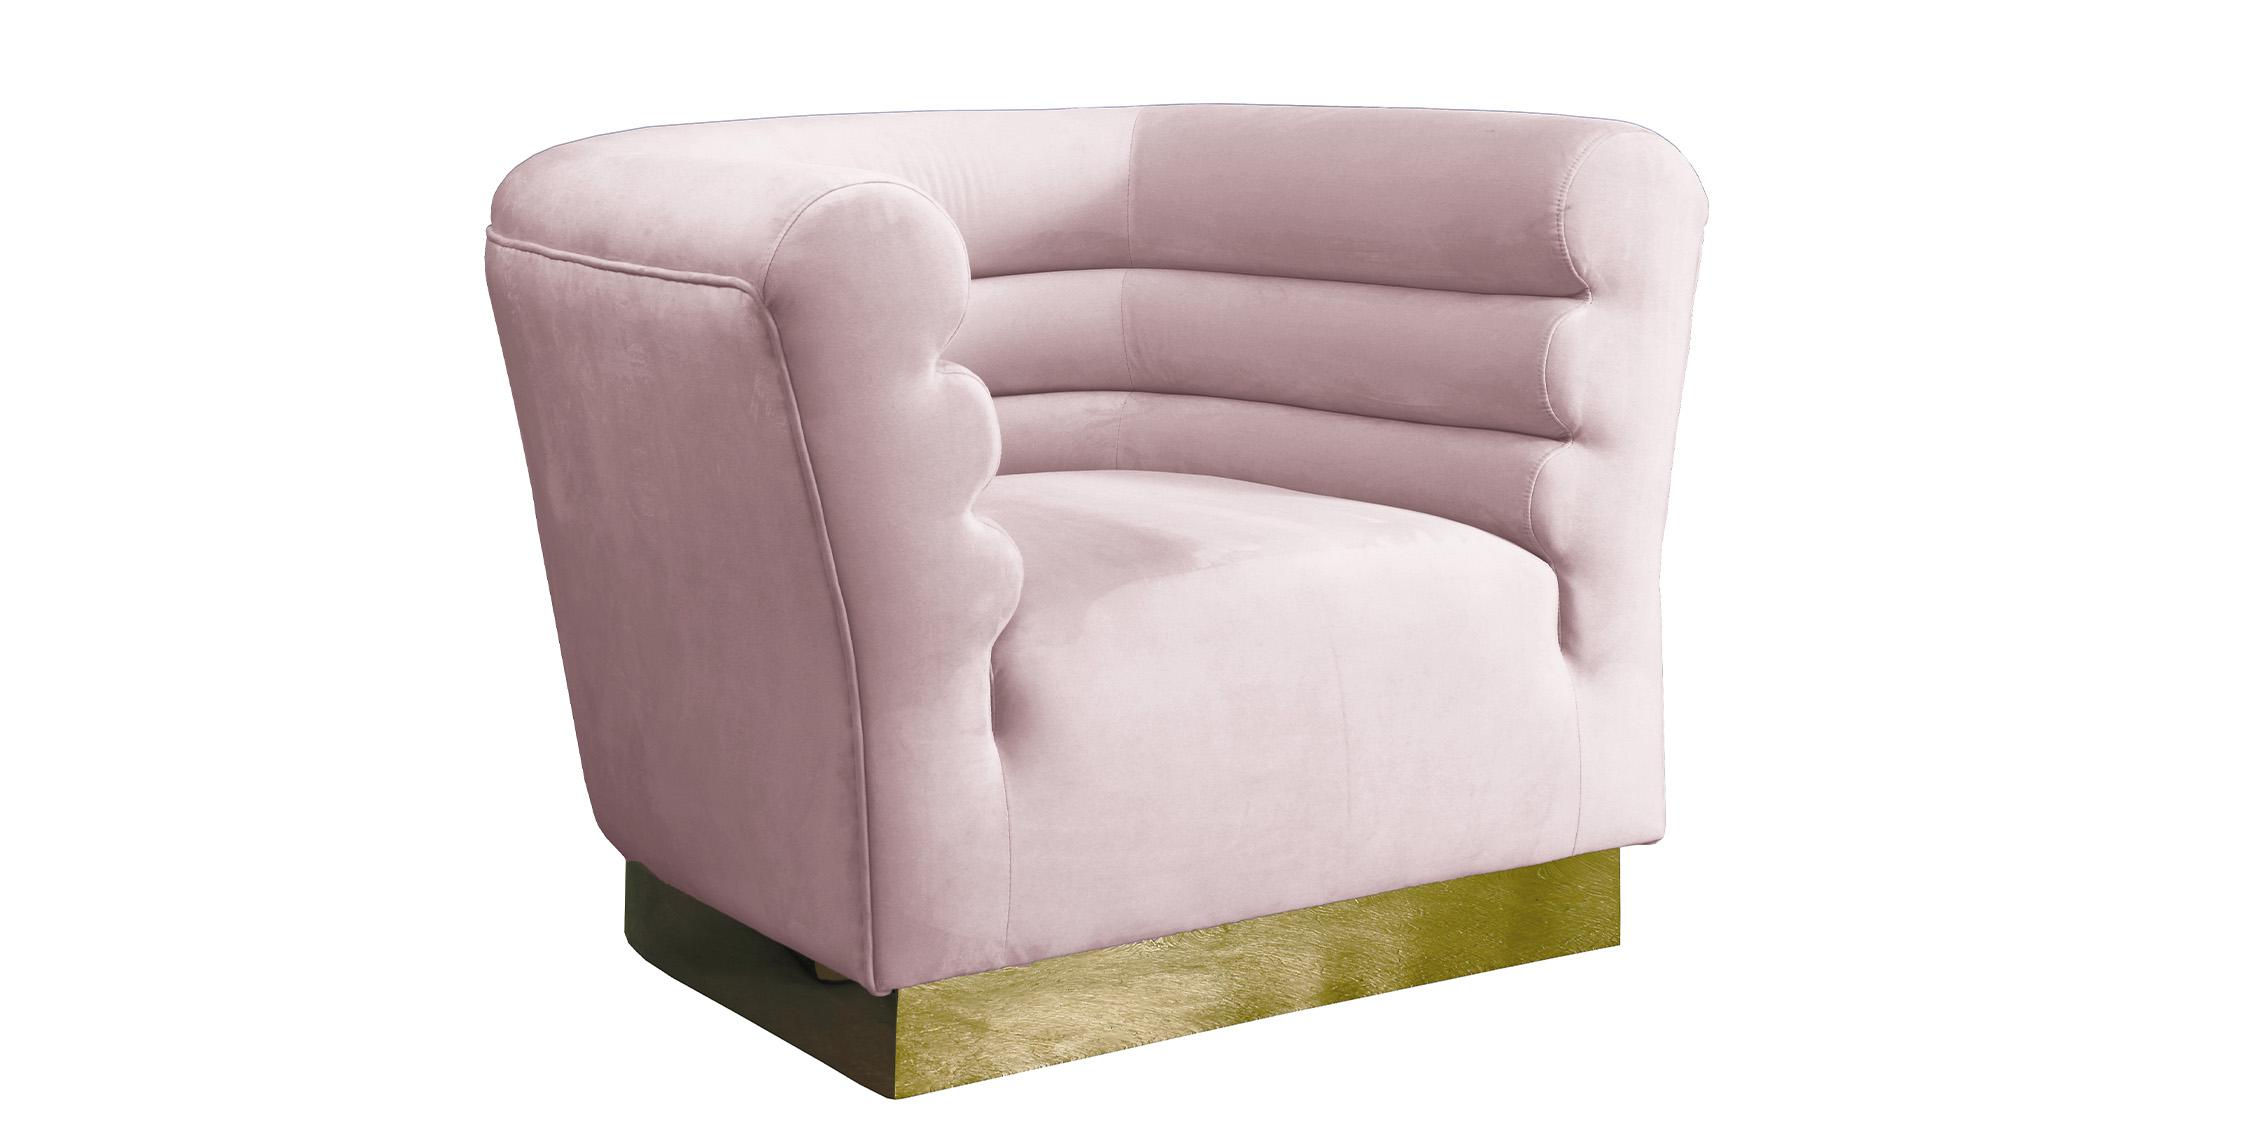 Contemporary, Modern Arm Chair BELLINI 669Pink-C 669Pink-C in Pink Velvet